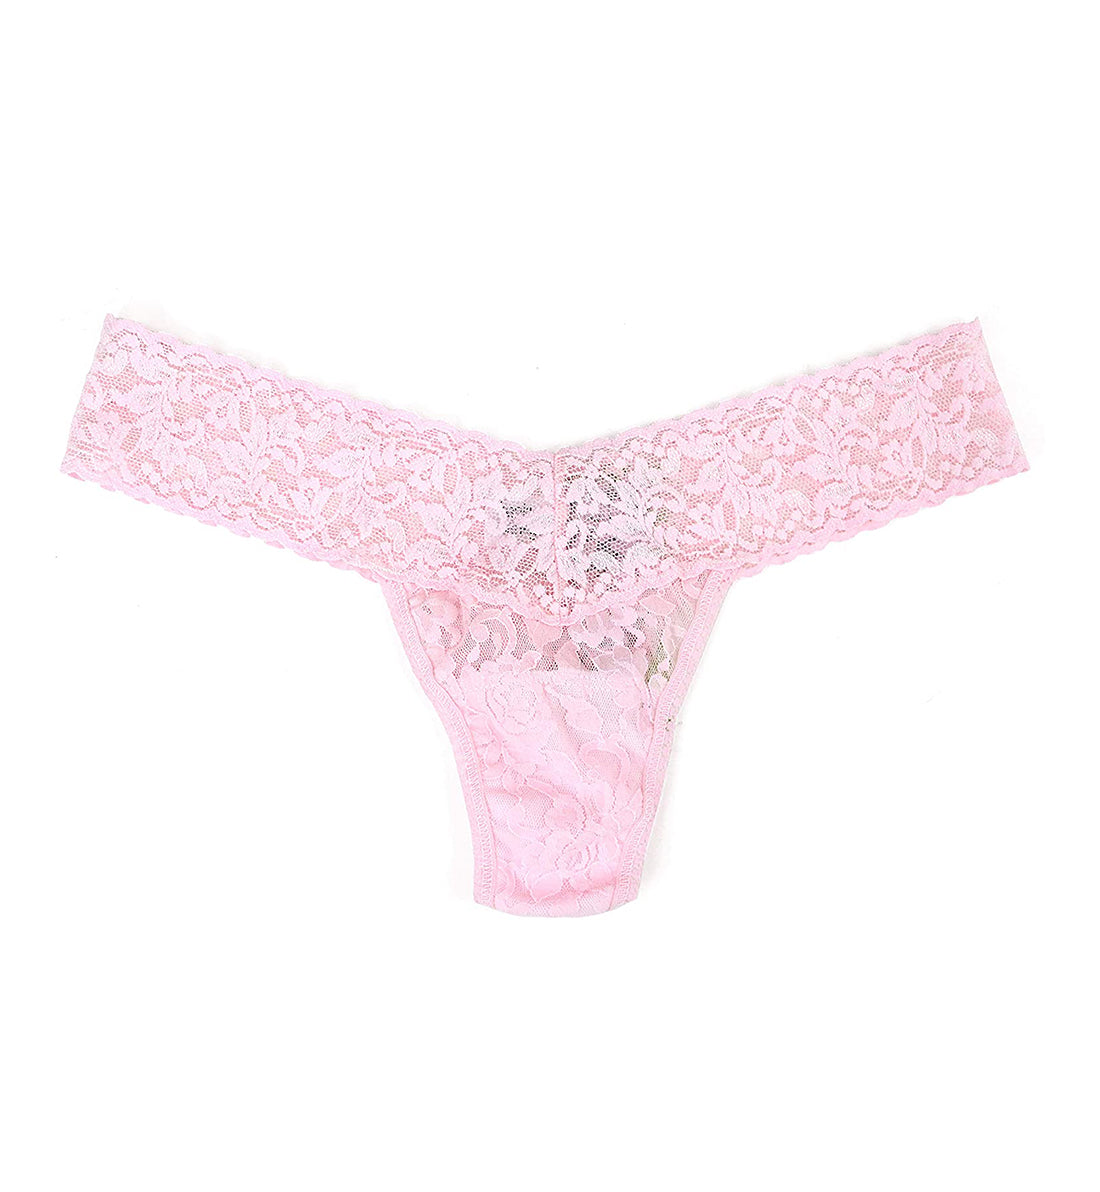 Hanky Panky Signature Lace Low Rise Thong (4911P),Bliss Pink - Bliss Pink,One Size